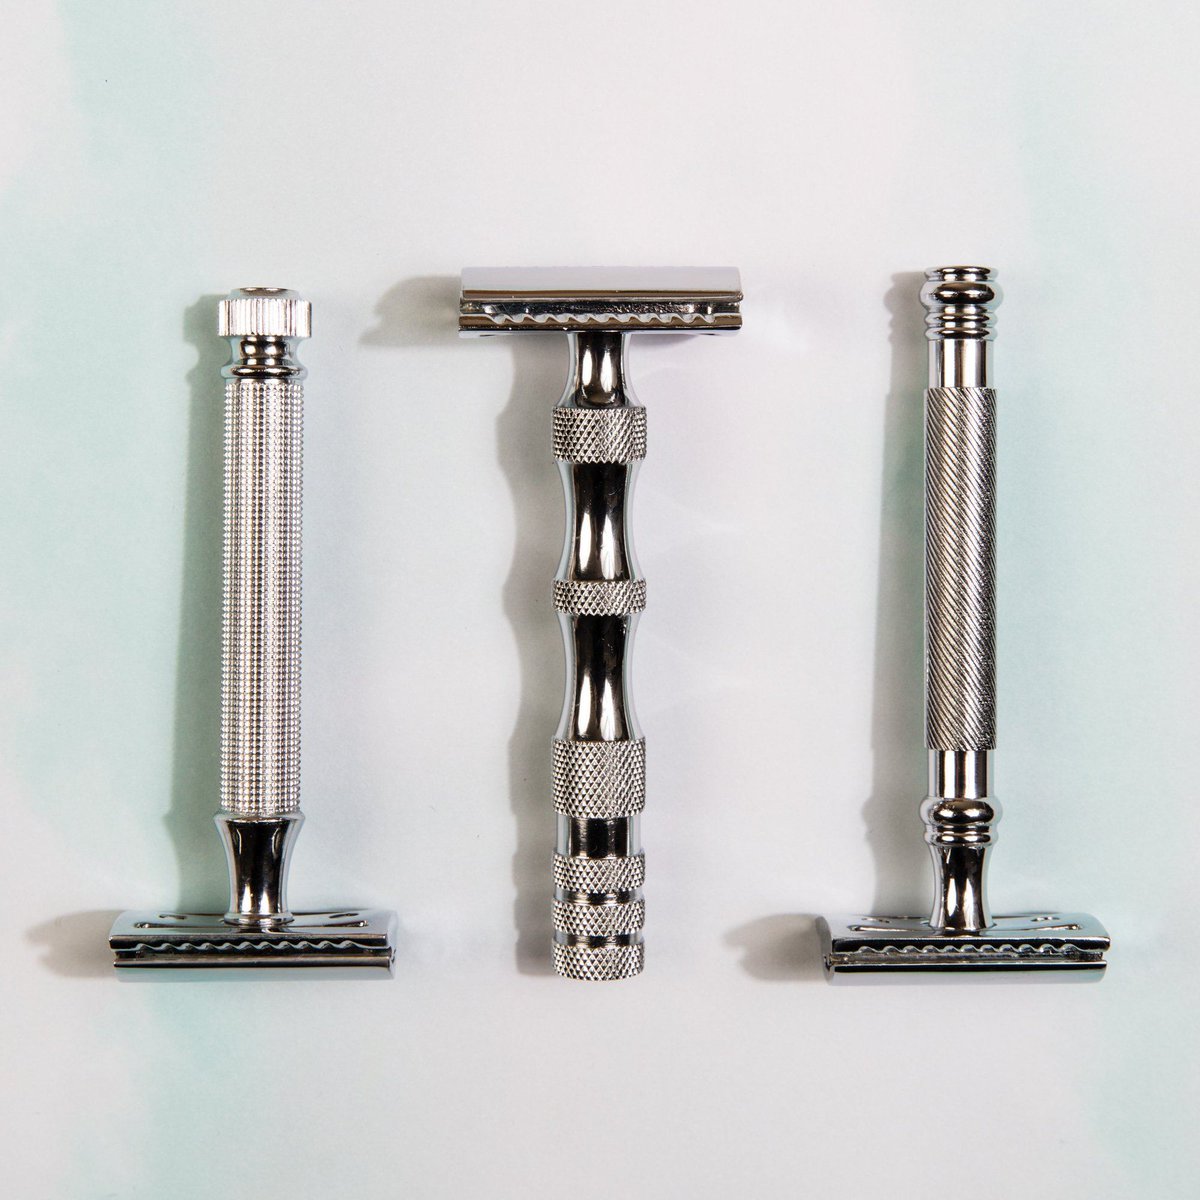 Have you shopped Fendrihan's collection of unique safety razors? 🪒

View them here: ow.ly/vaQp50RUayQ

#sotd #wetshaving #mensgrooming #mensstyle #shaving #safetyrazor #Fendrihan